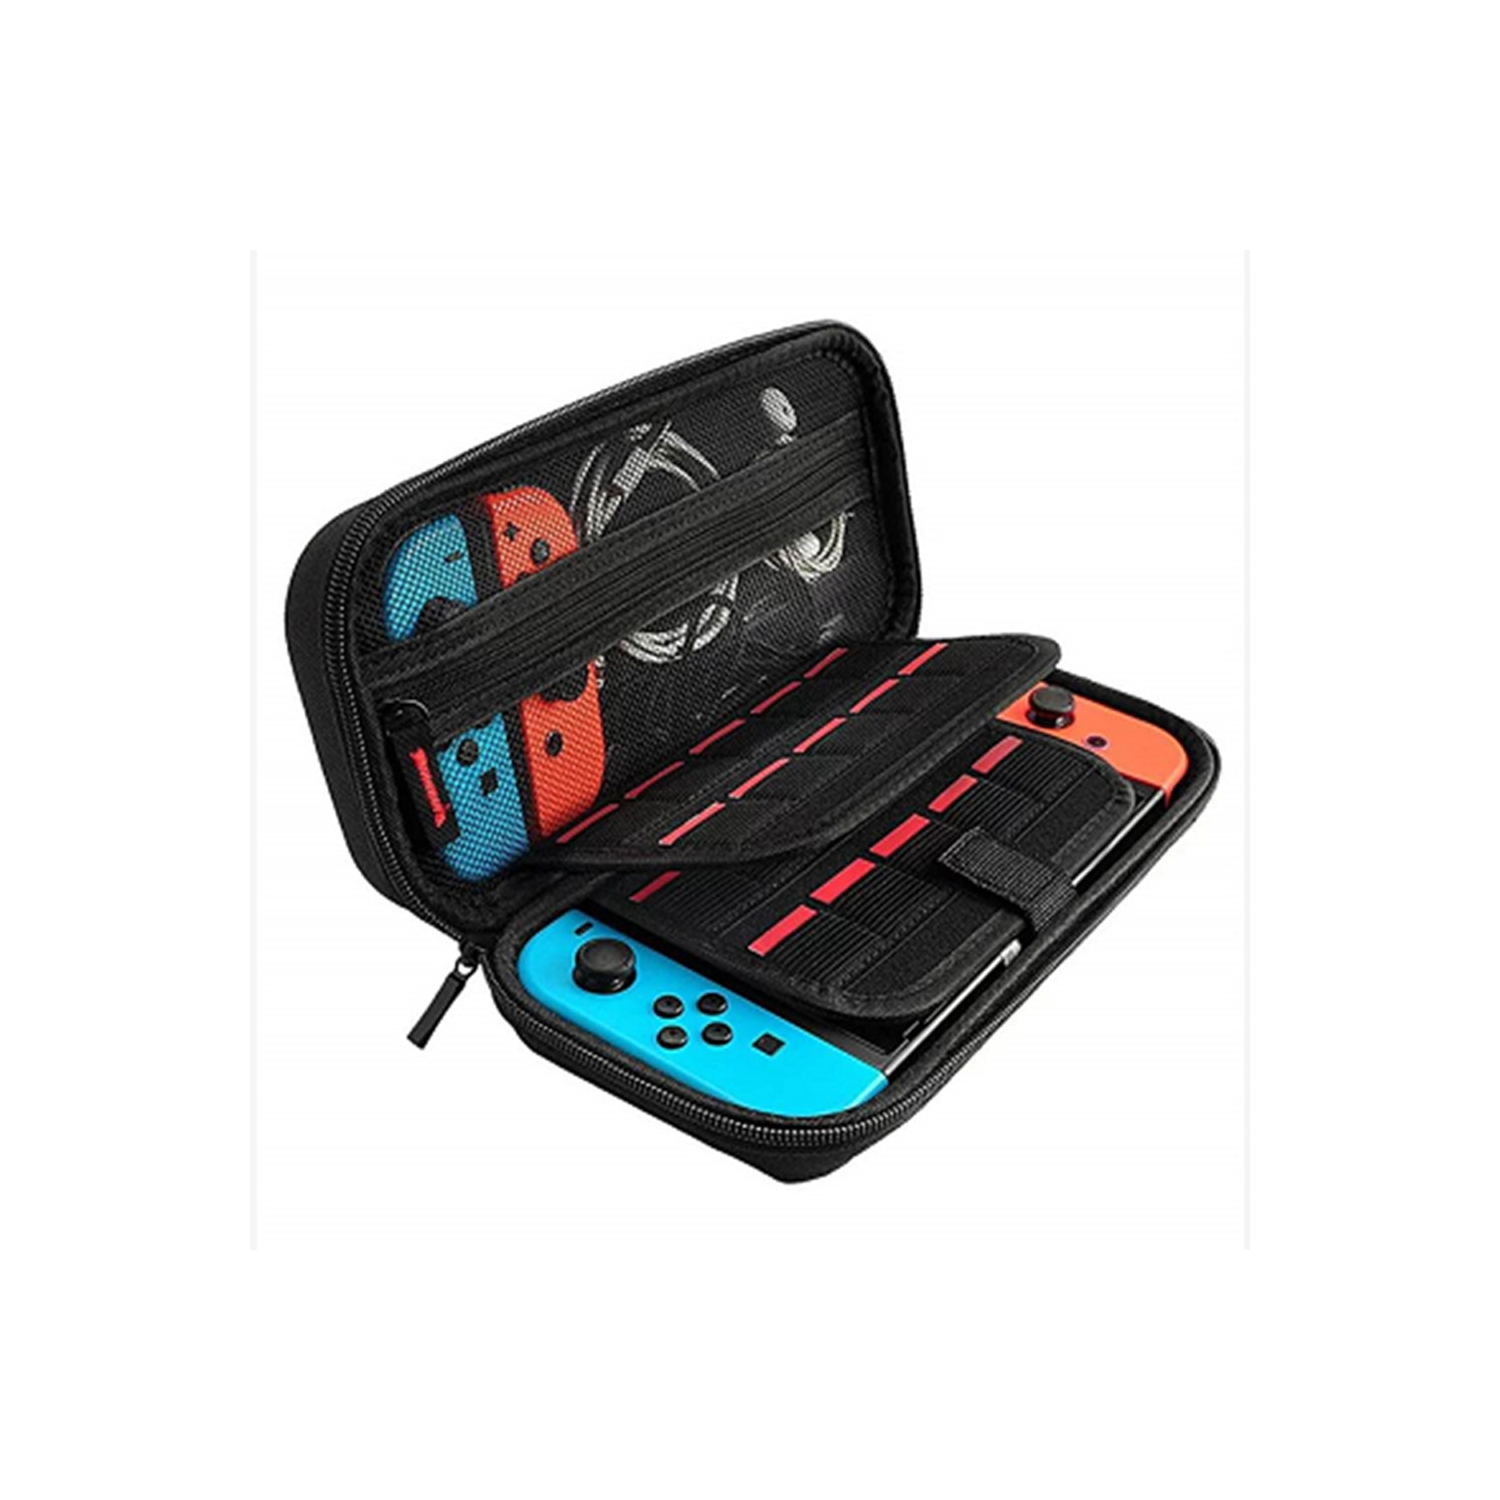 Carry Case compatible with Nintendo Switch Protects your Nintendo Switch Console Joy Cons Games and Accessories - axGear